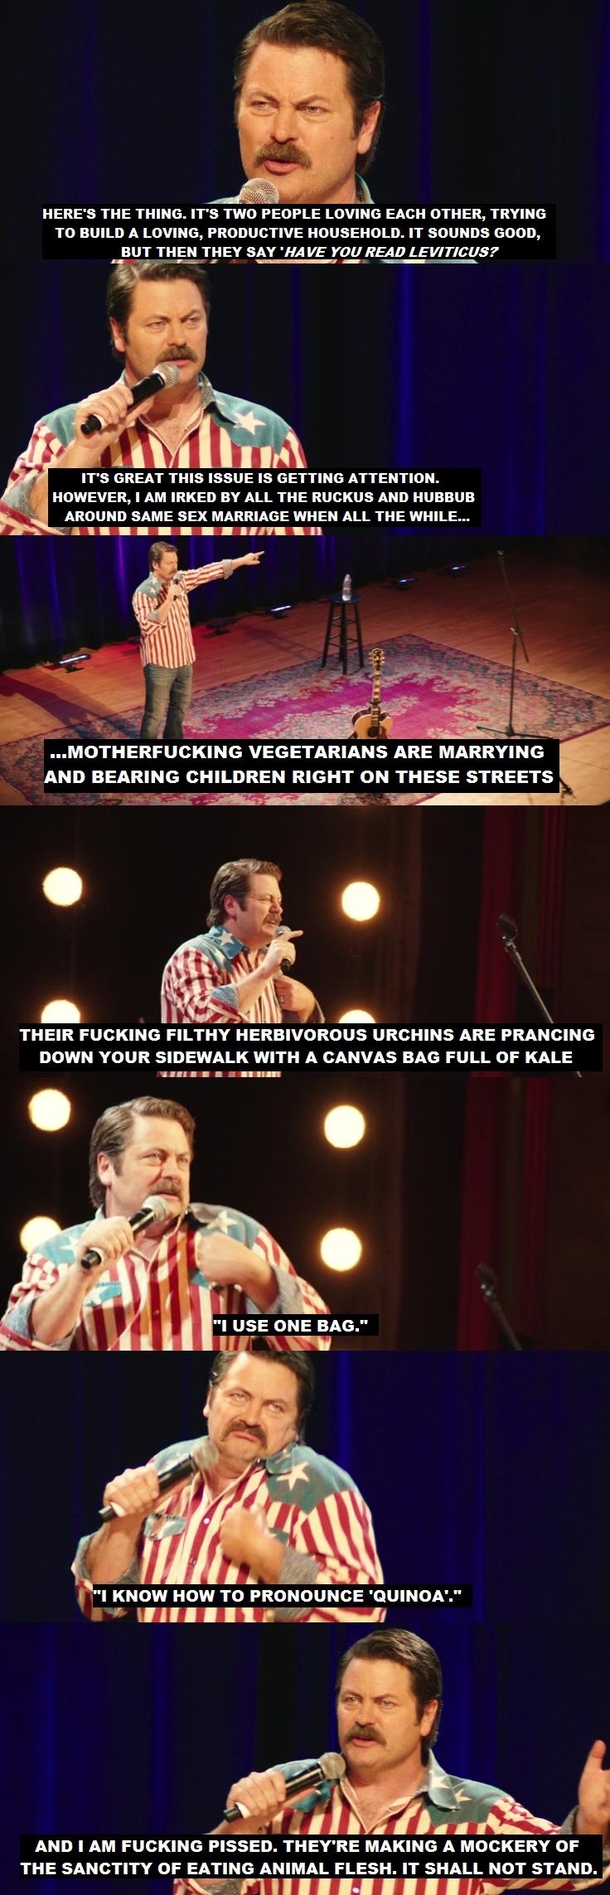 Nick Offerman Makes A Case For Gay Marriage